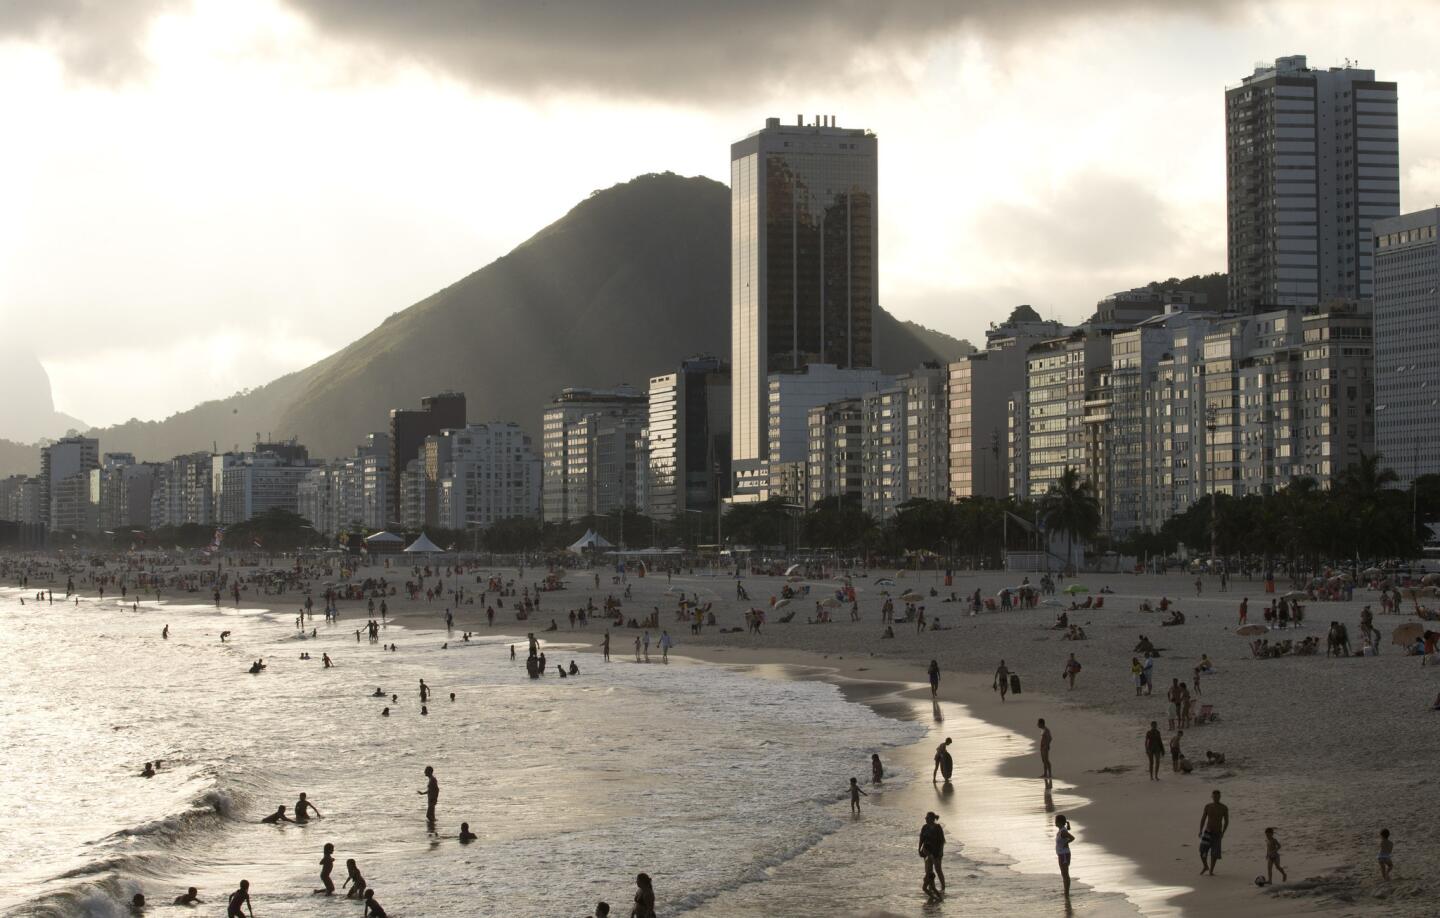 This year's Summer Olympics will be held in Rio de Janeiro, taking place from Aug. 5 to 21. And they are going to be crowded. Not only can sports fans cheer on their favorite athletes, but they can also check out all the city has to offer including plenty of restaurants, nightclubs and museums.